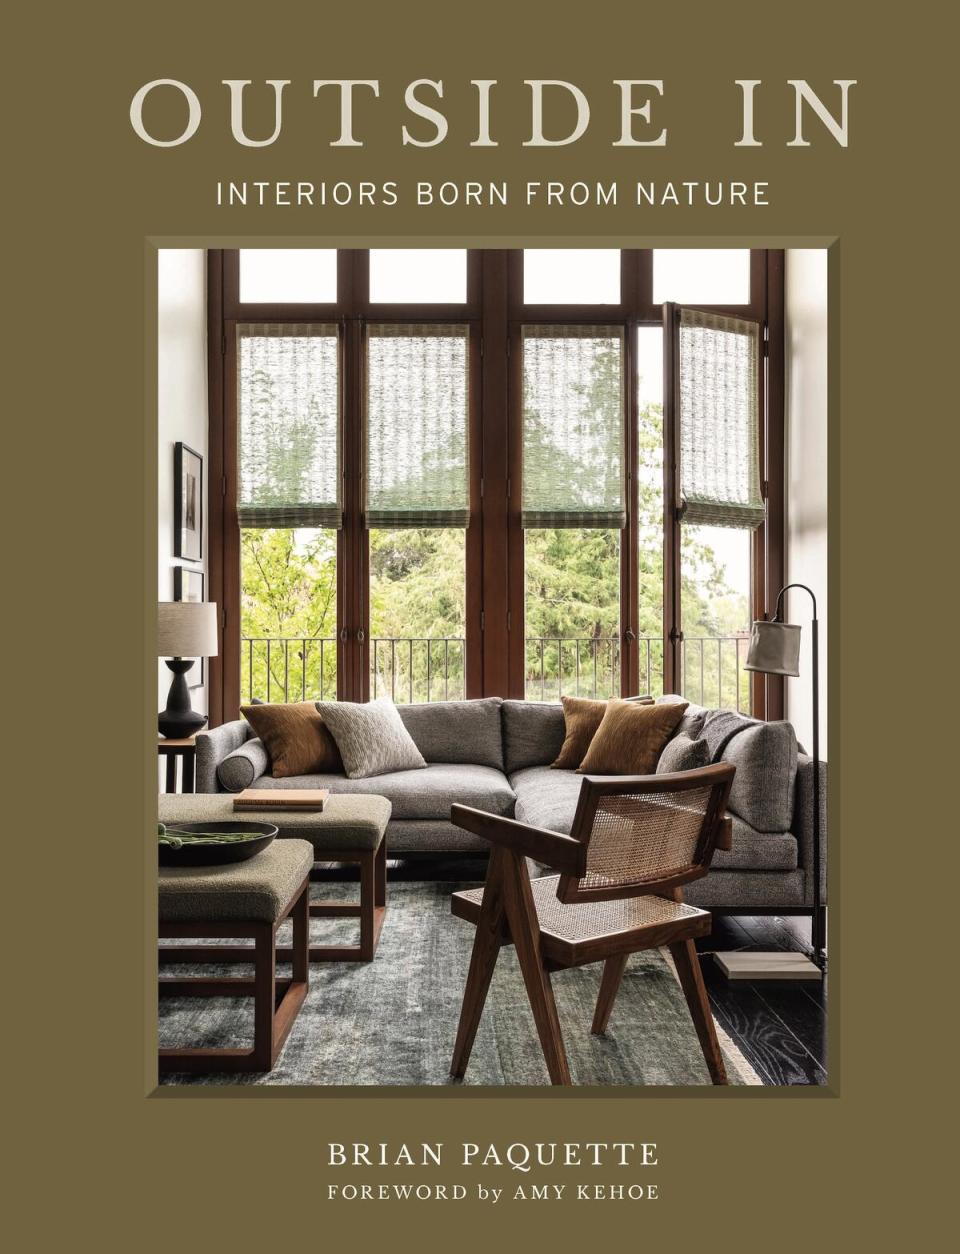 Brian Paquette pairs his recent work with photos of the landscapes that inspire his approach in his second book, “Outside In: Interiors Born From Nature”